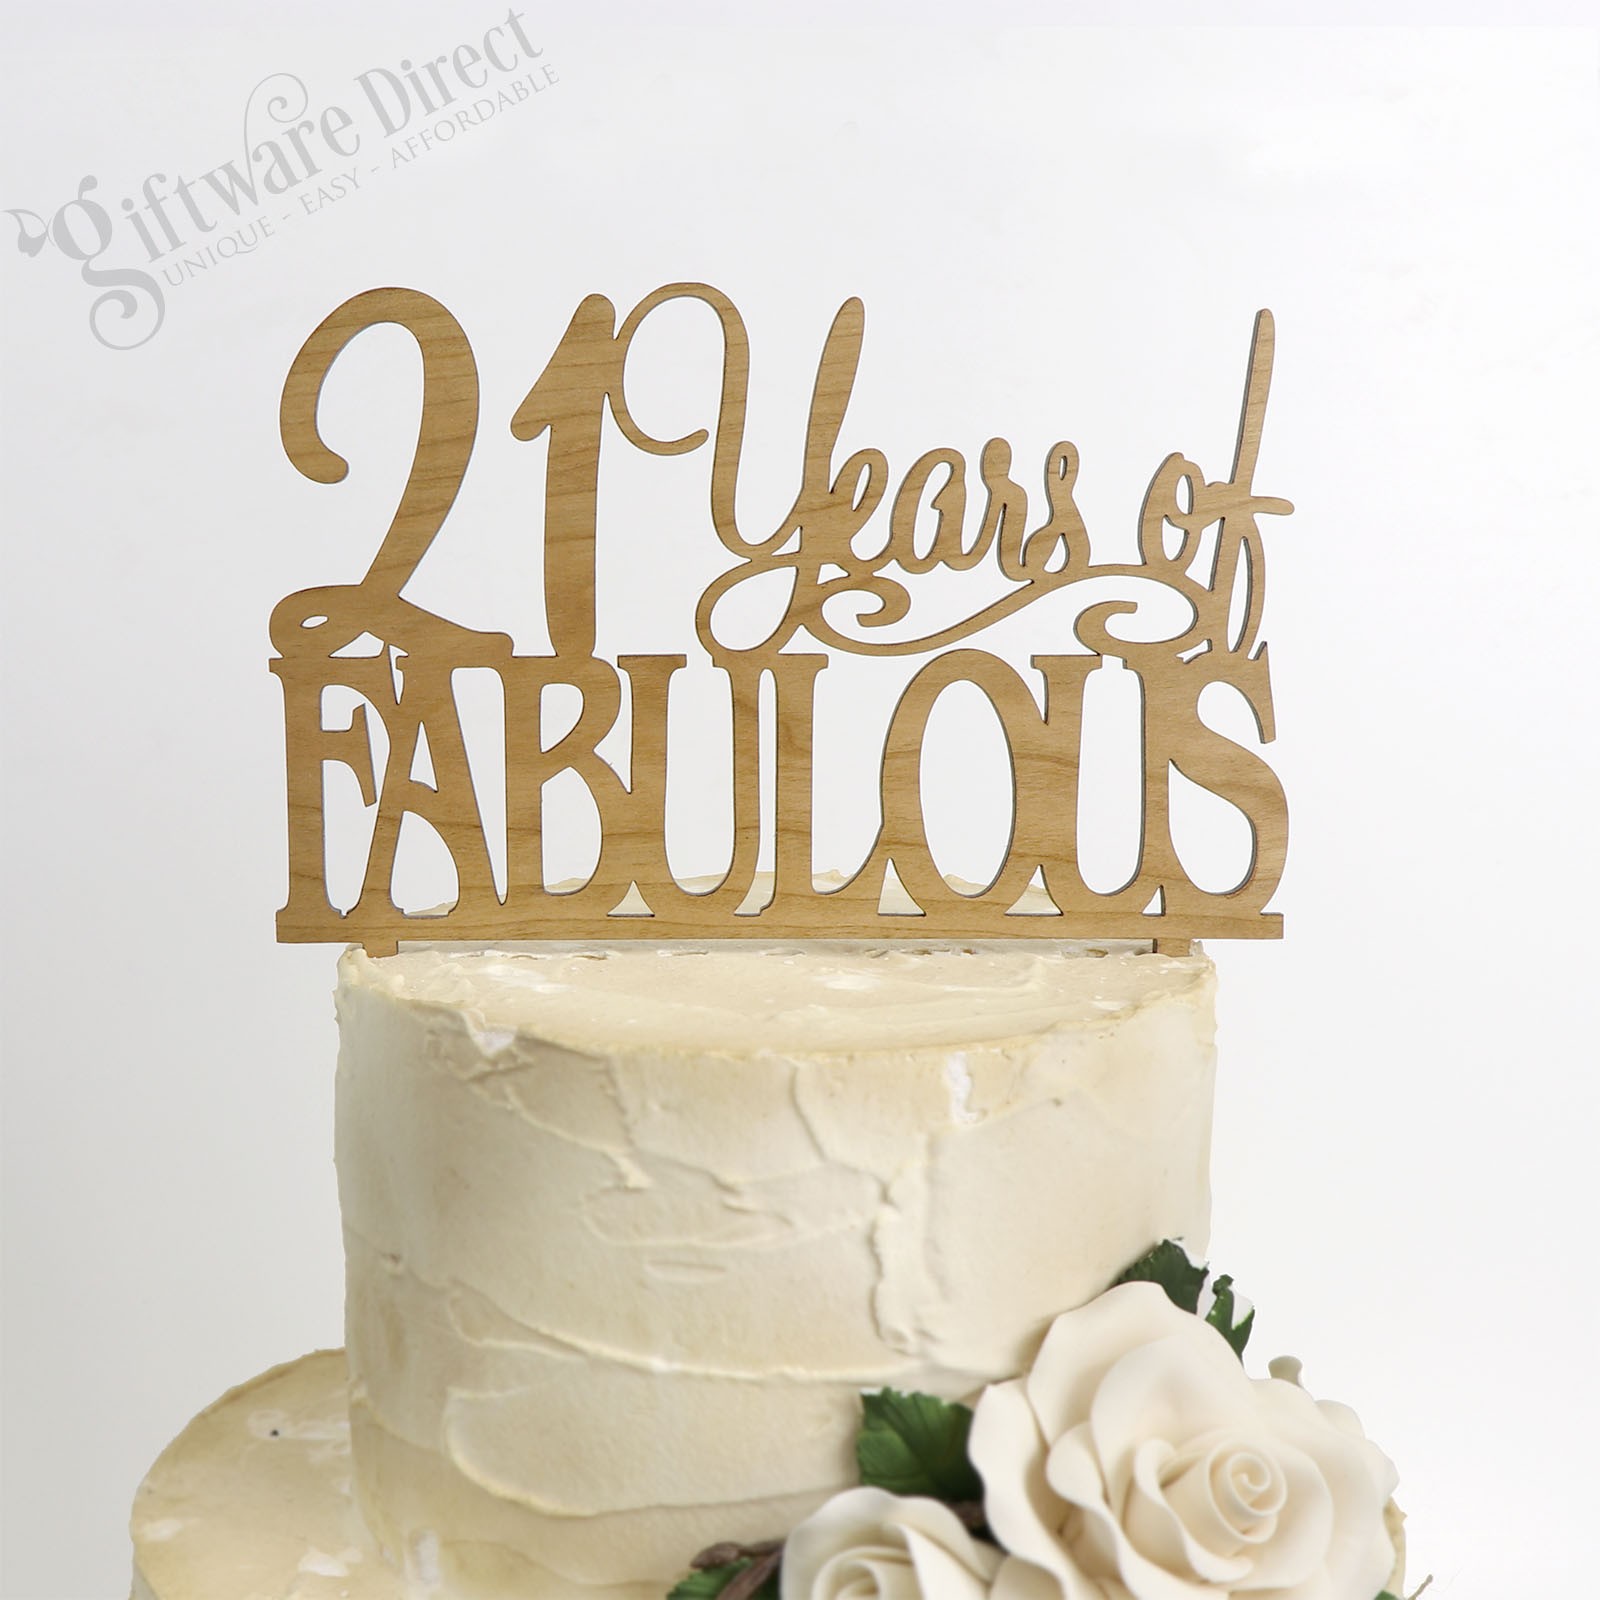 21st Birthday Present Ideas 21 Years of Fabulous Birthday Bamboo Cake Topper Any Age cake topper